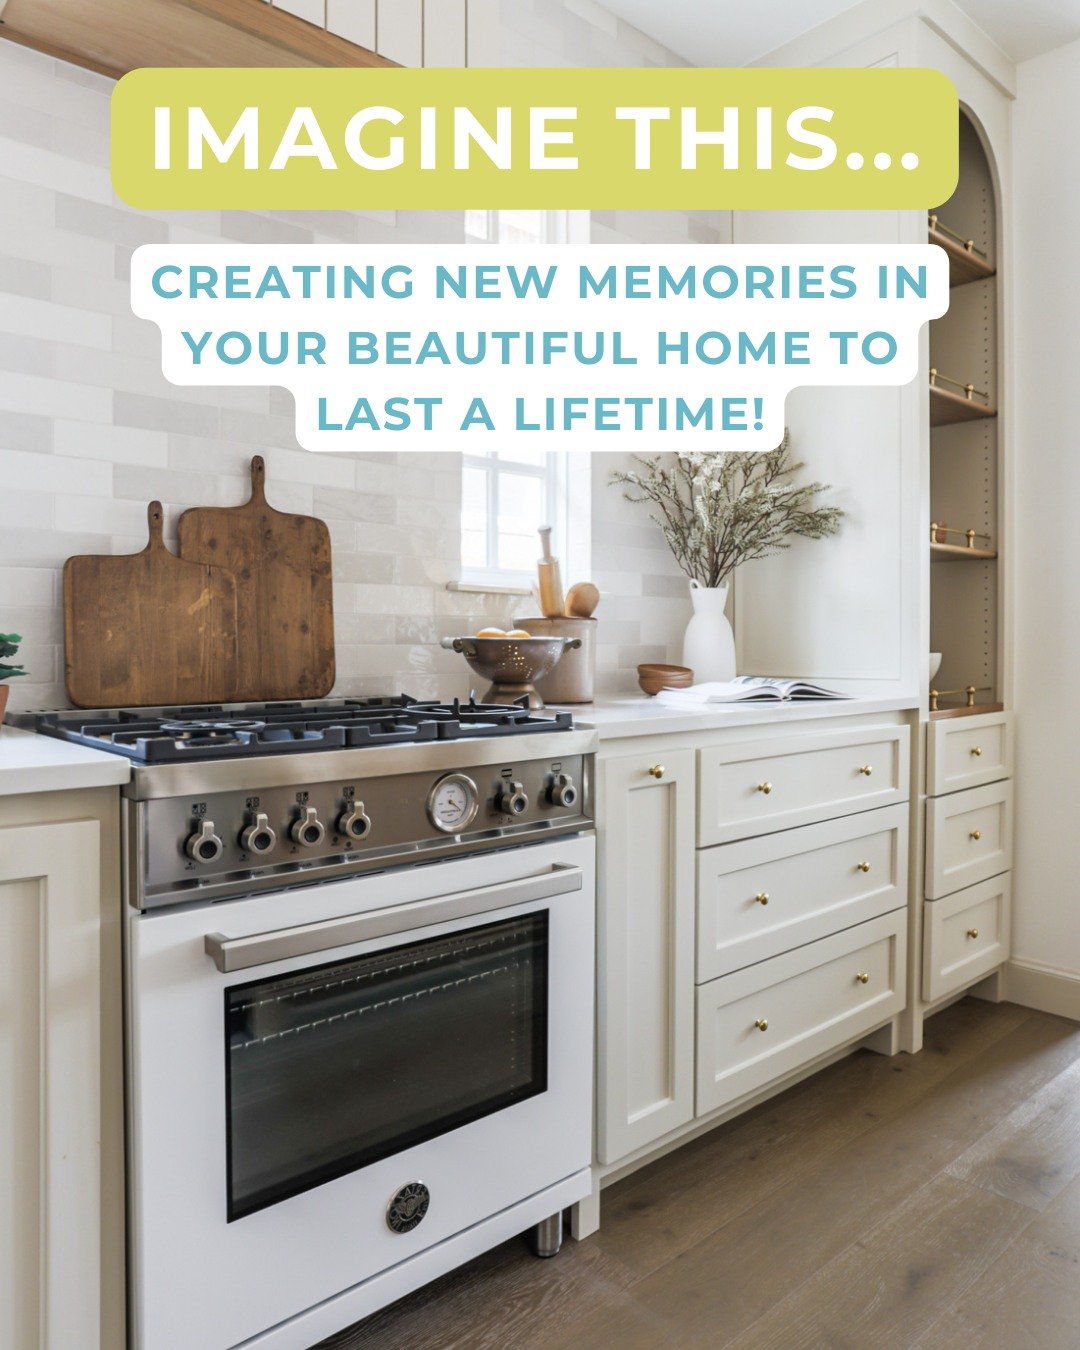 Tell me if this sounds like you&hellip;

1. You want a beautiful home where you can make memories that will last a lifetime. 

2. You can&rsquo;t wait to have the perfect space for your family to make those memories in when it comes time for:

- East